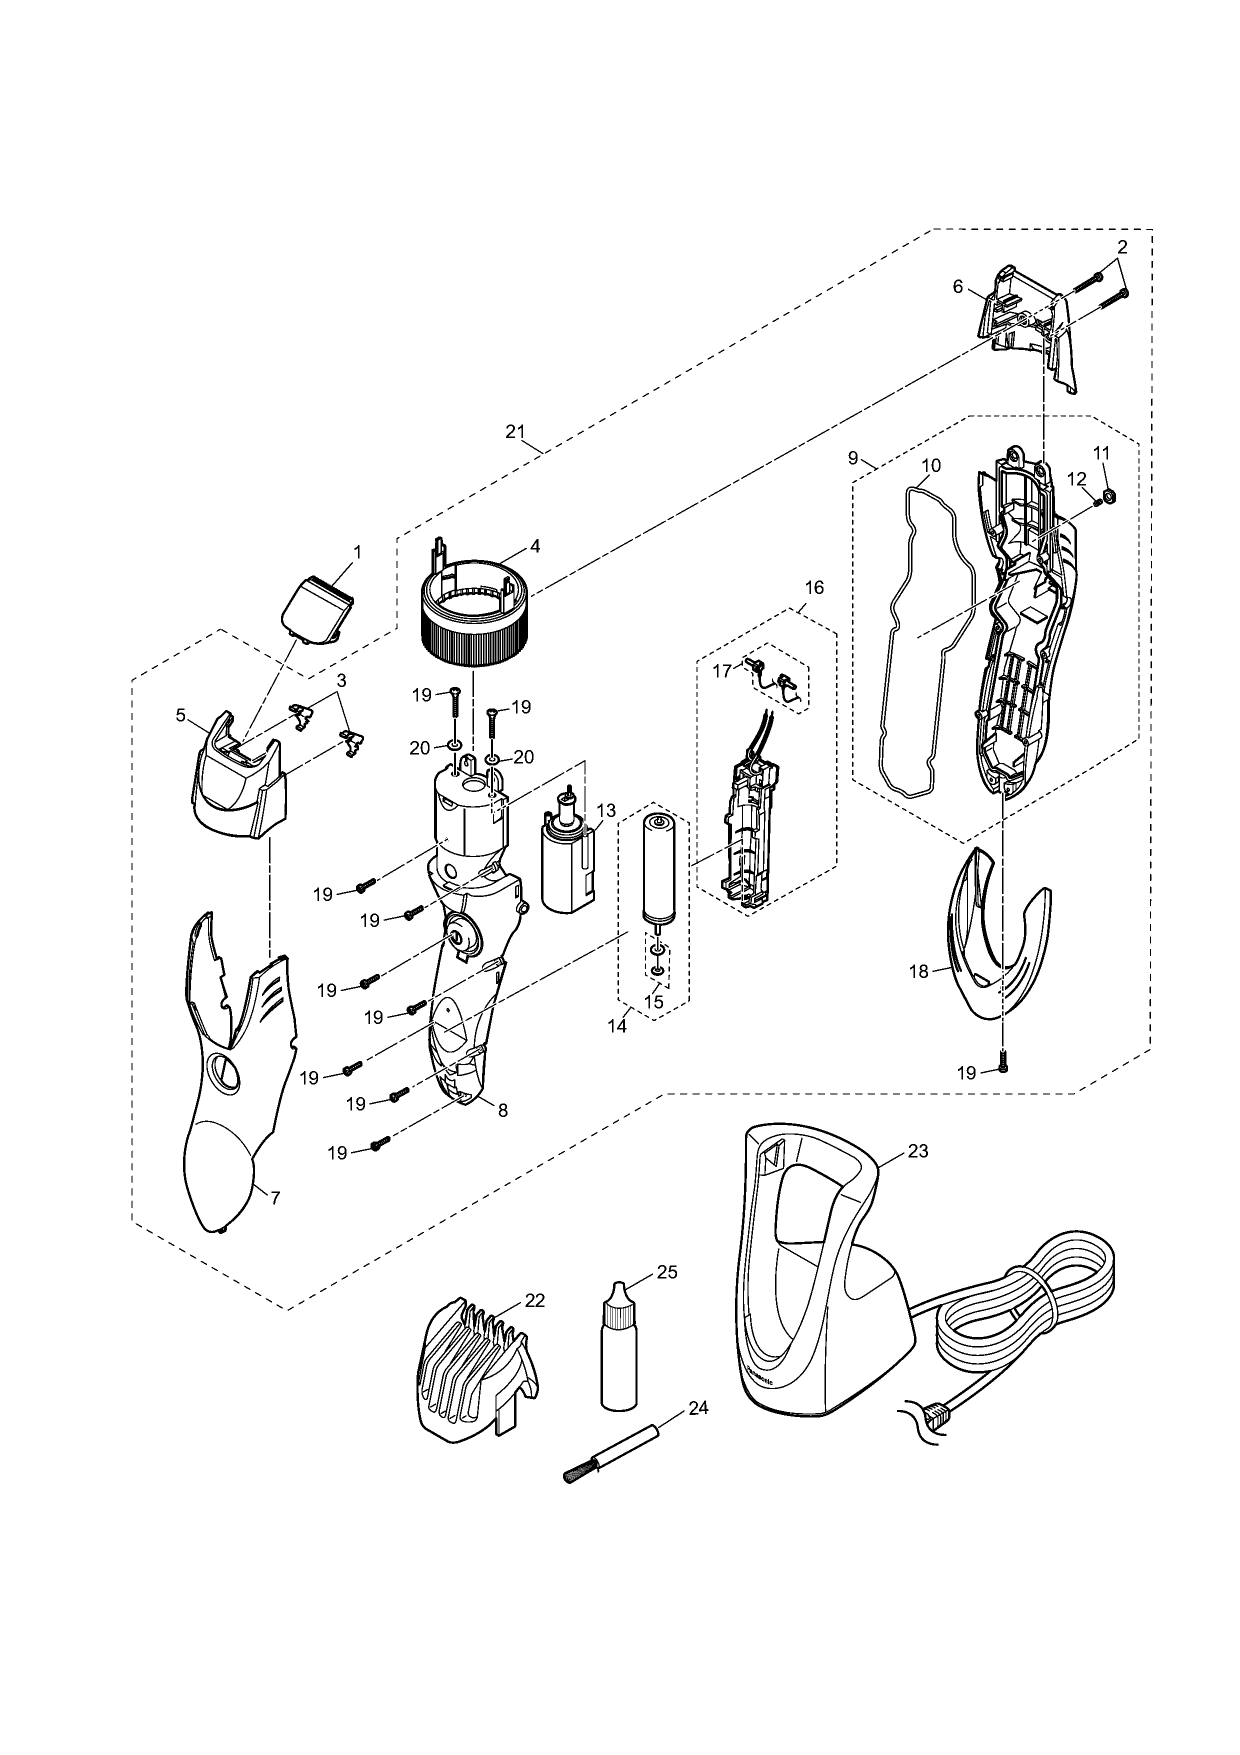 ER-GB40: Exploded View